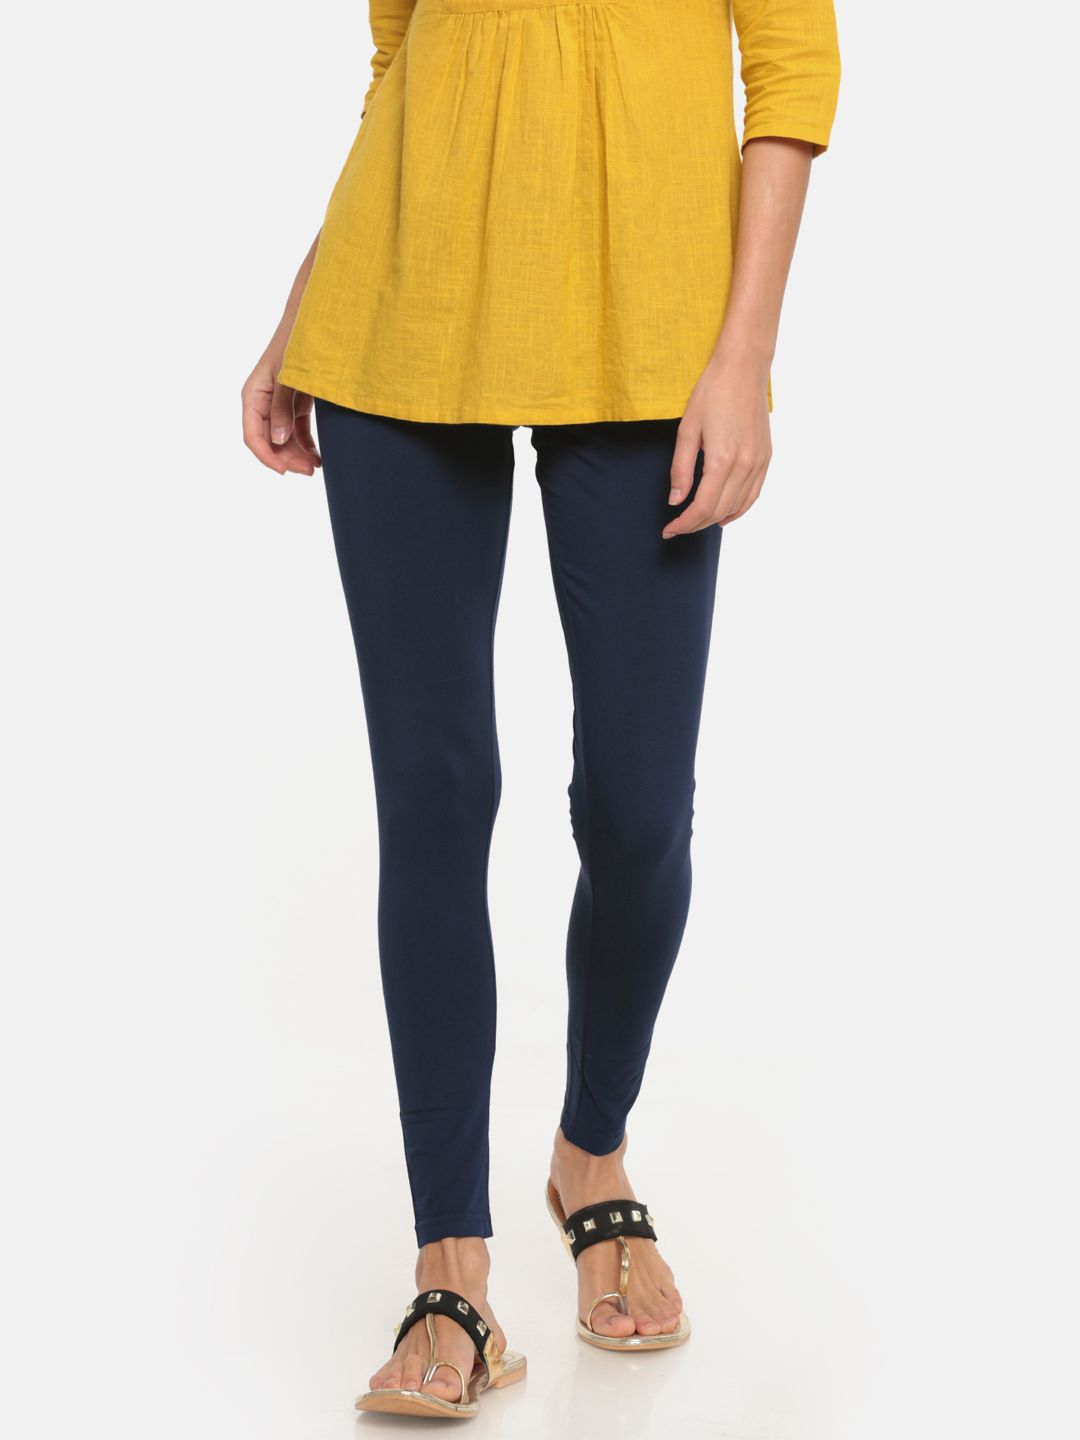 Go Colors Women Navy Blue Solid Ankle-Length Leggings Price in India